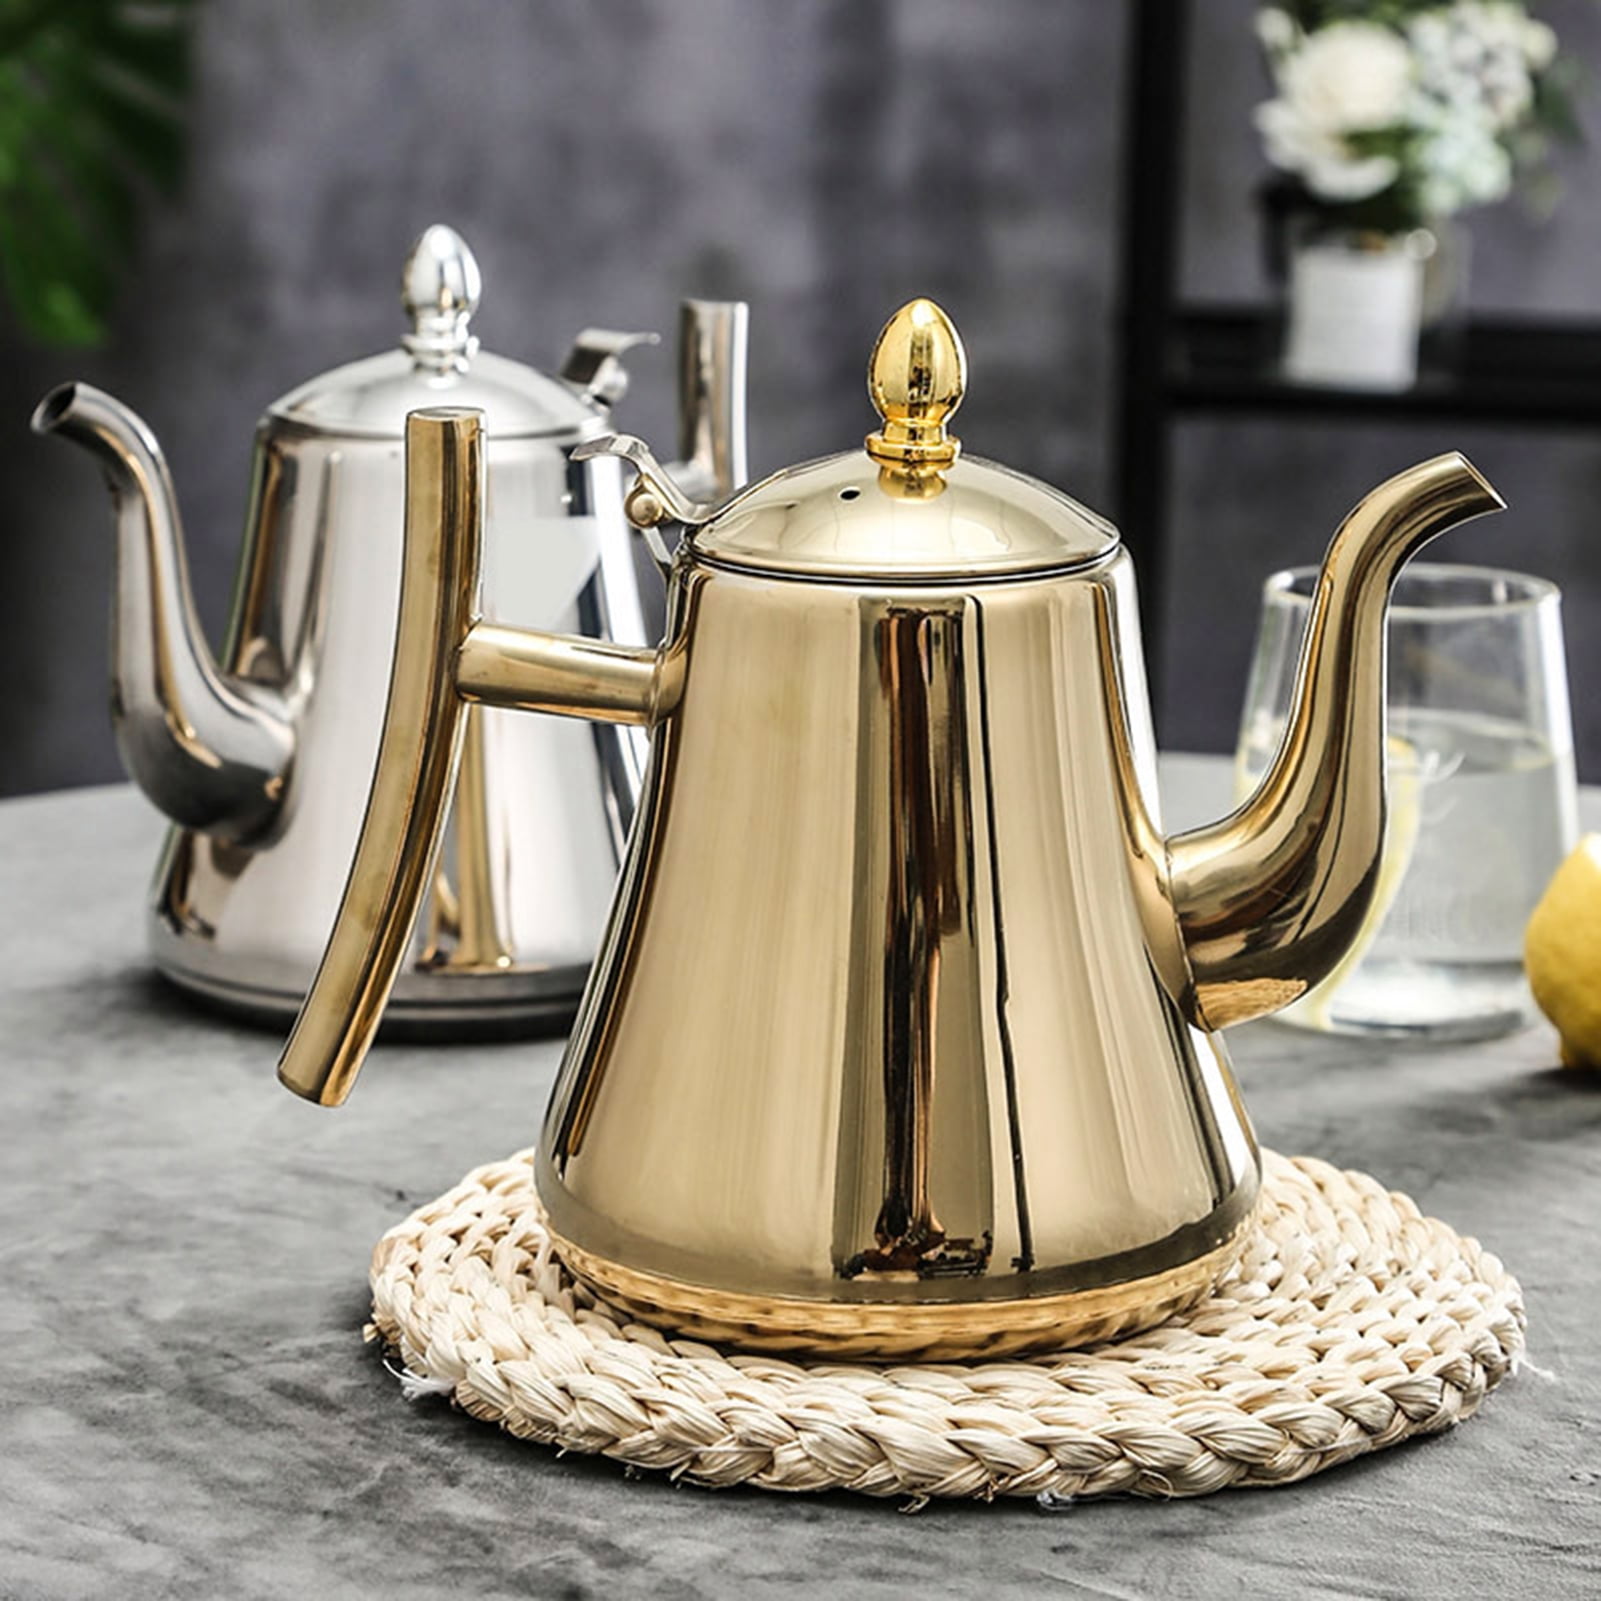 1pc, Stainless Steel Gooseneck Teapot With Filter, Metal Tea Pot Kettle  Coffee Server Olive Oil Can Table Serving Pot For Home, Restaurant,  Outdoor, D